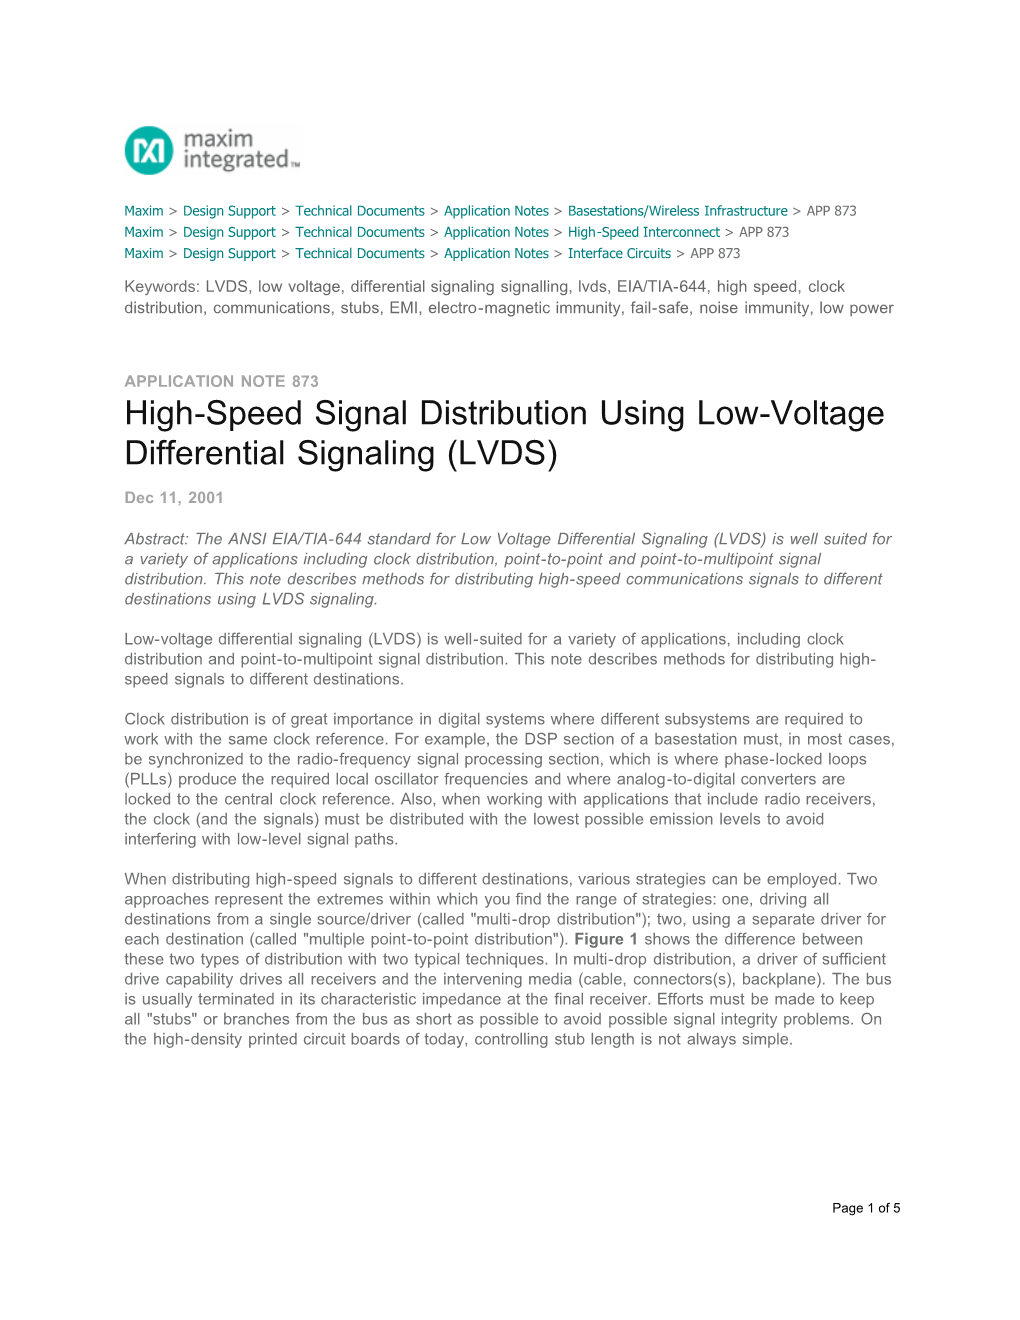 High-Speed Signal Distribution Using Low-Voltage Differential Signaling (LVDS)